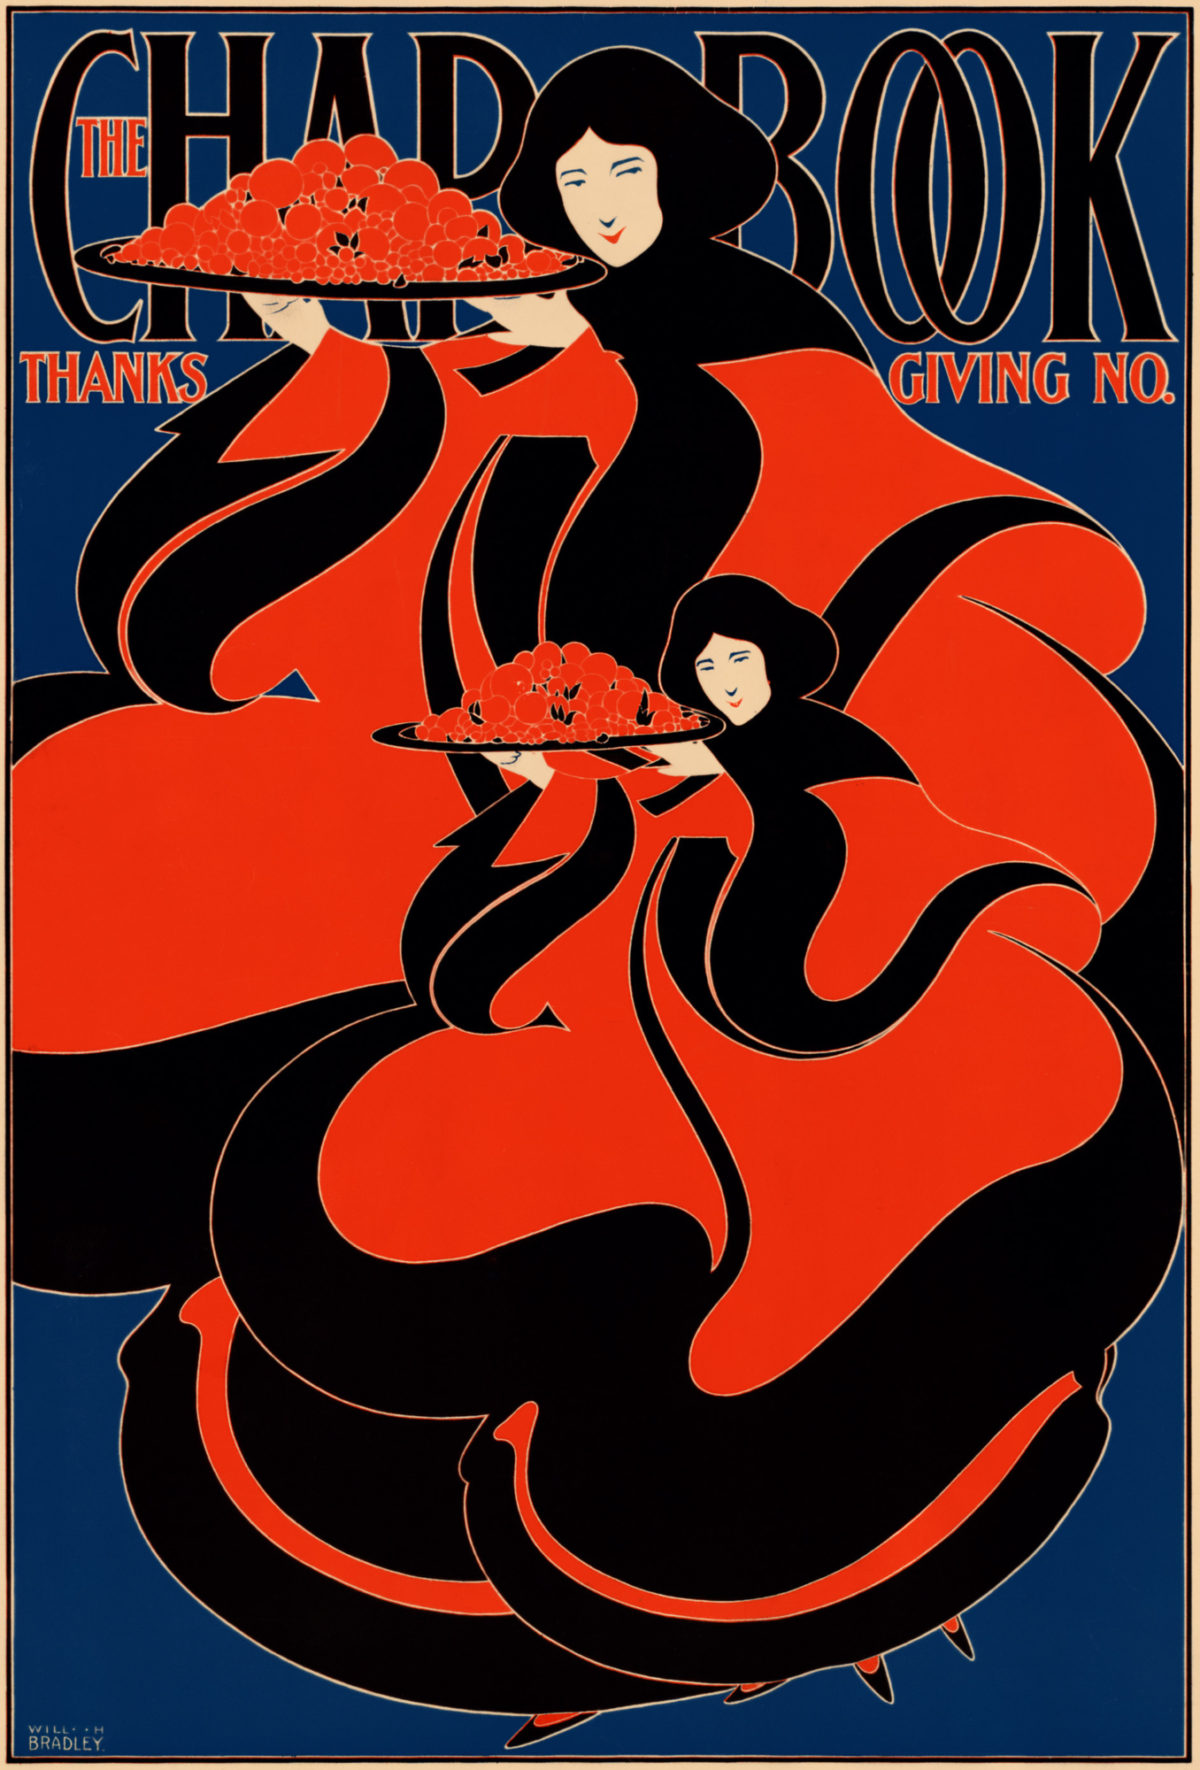 The_Chap-Book_Thanksgiving_number_advertising_poster_1895